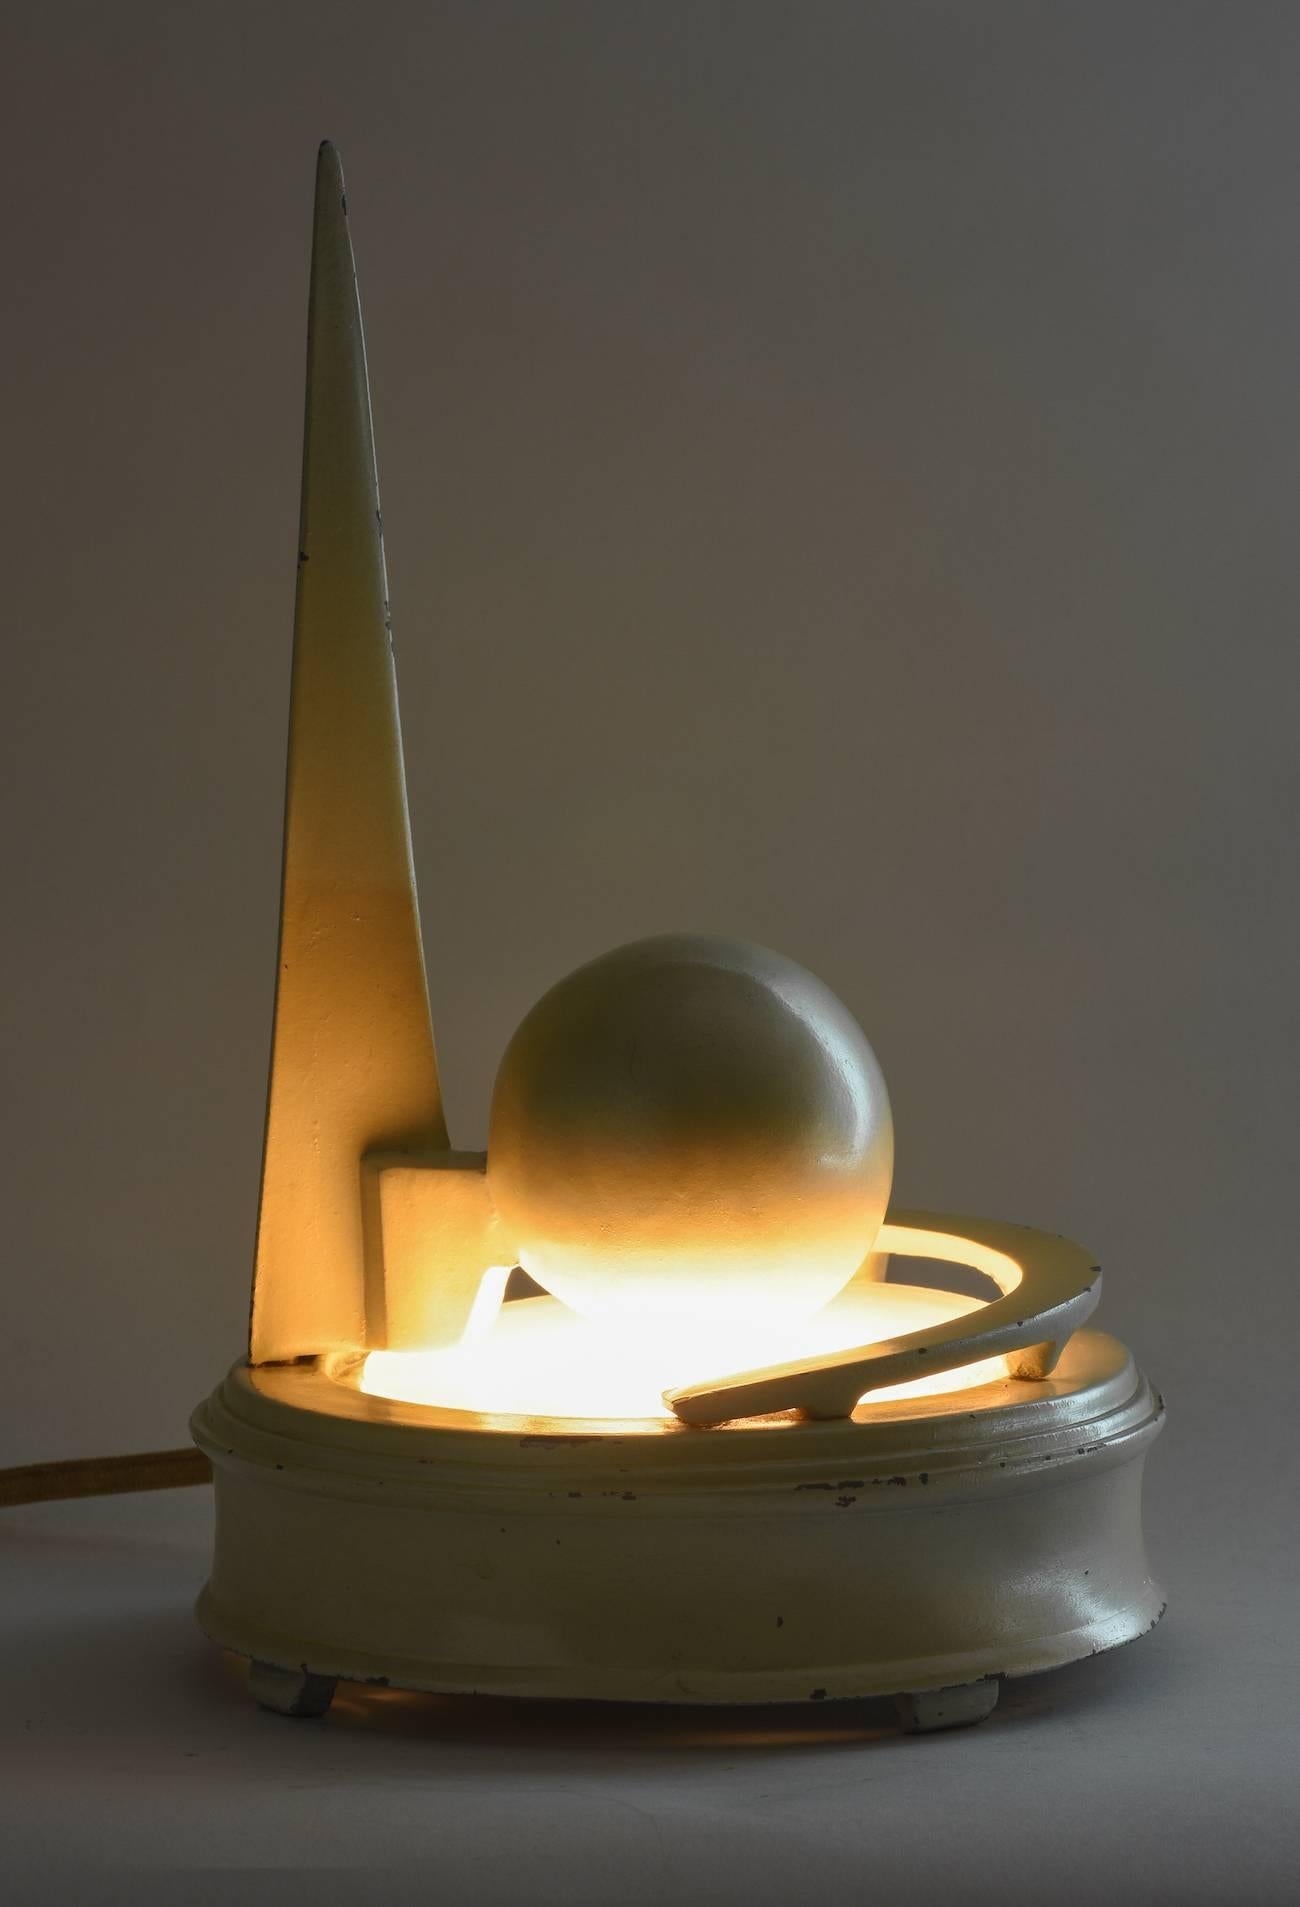 Extremely rare large Trylon and Perisphere lamp, 1939 New York World’s Fair, New York. 
Painted white metal and glass, 8-1/2” high, 1939.

Among the most distinctive and memorable New York buildings is one that no longer stands, the theme